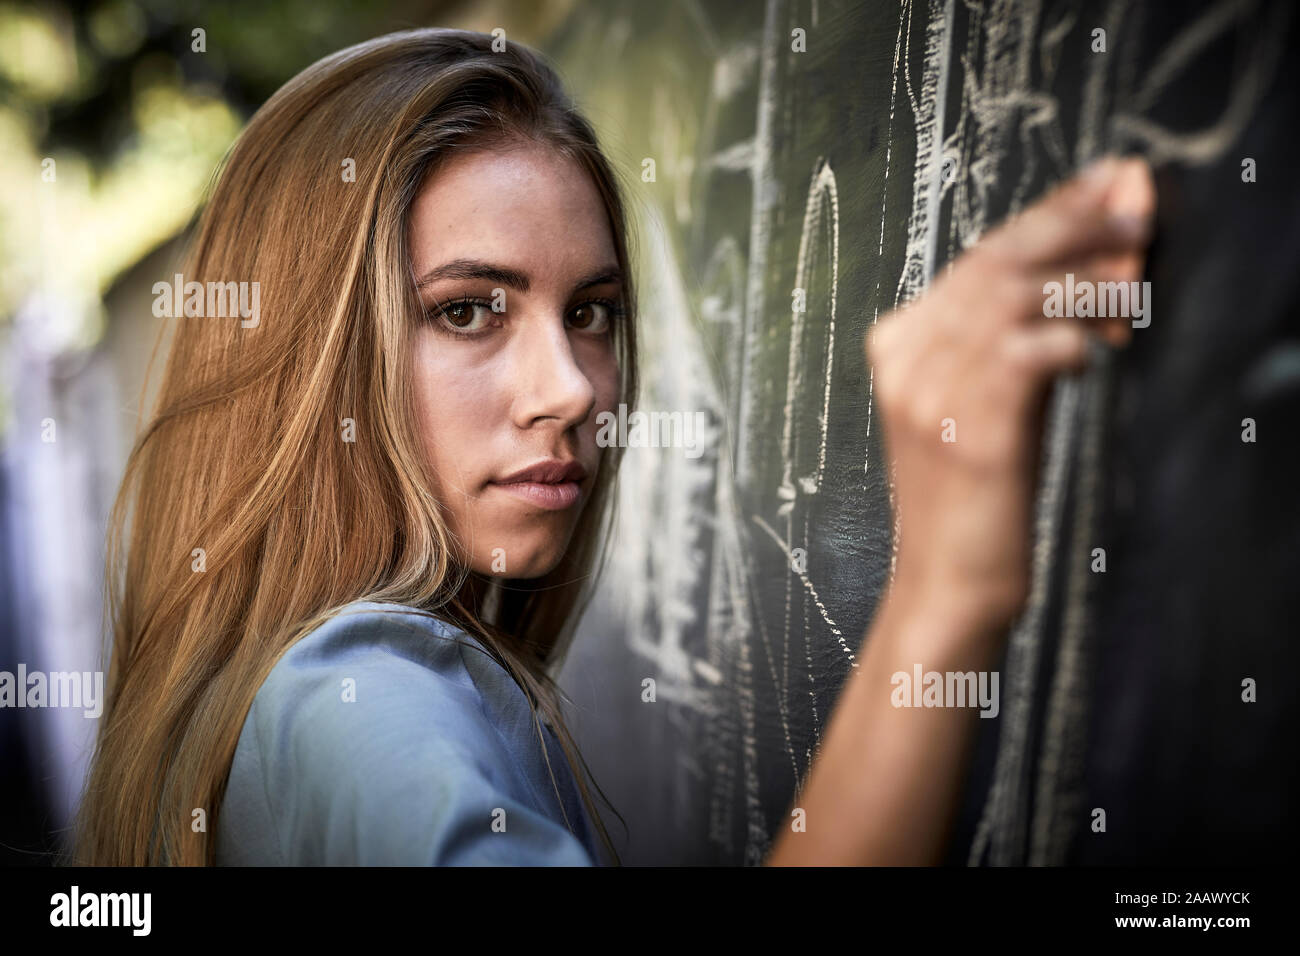 Portrait of a young woman writing on a blackboard Stock Photo